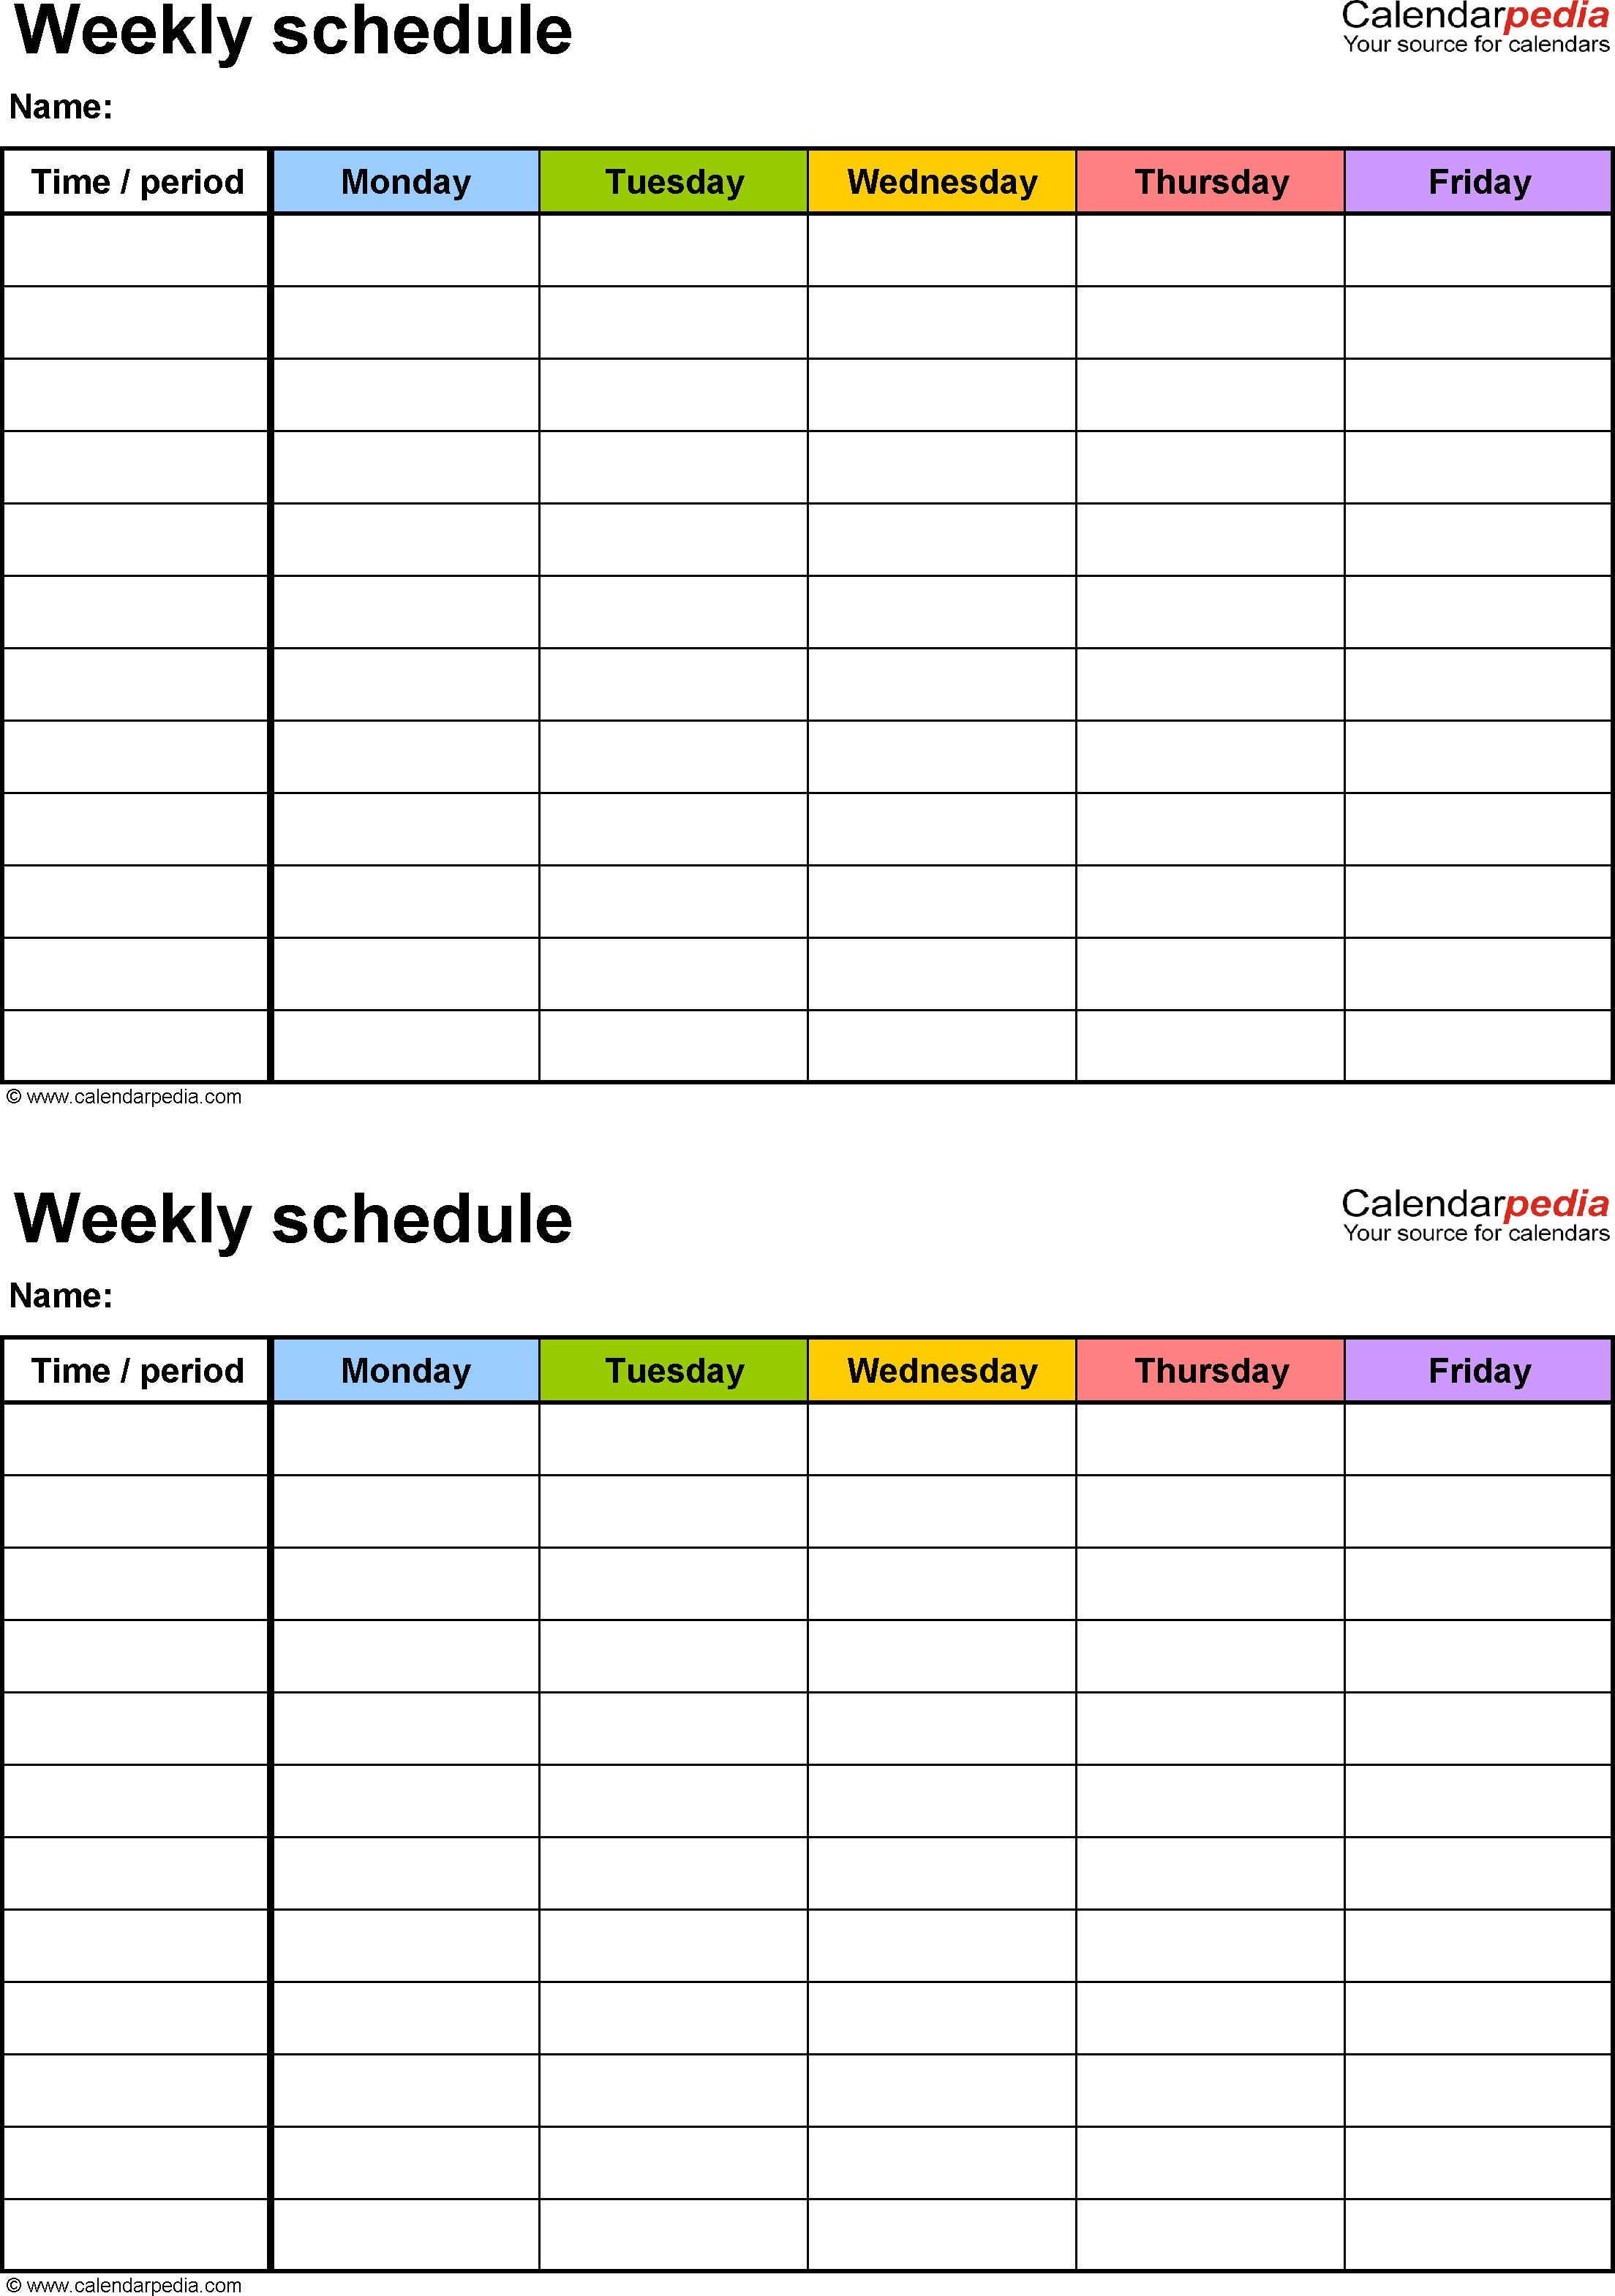 Free Weekly Schedule Templates For Word - 18 Templates-Free Printable Monday-Friday Monthly Calendar